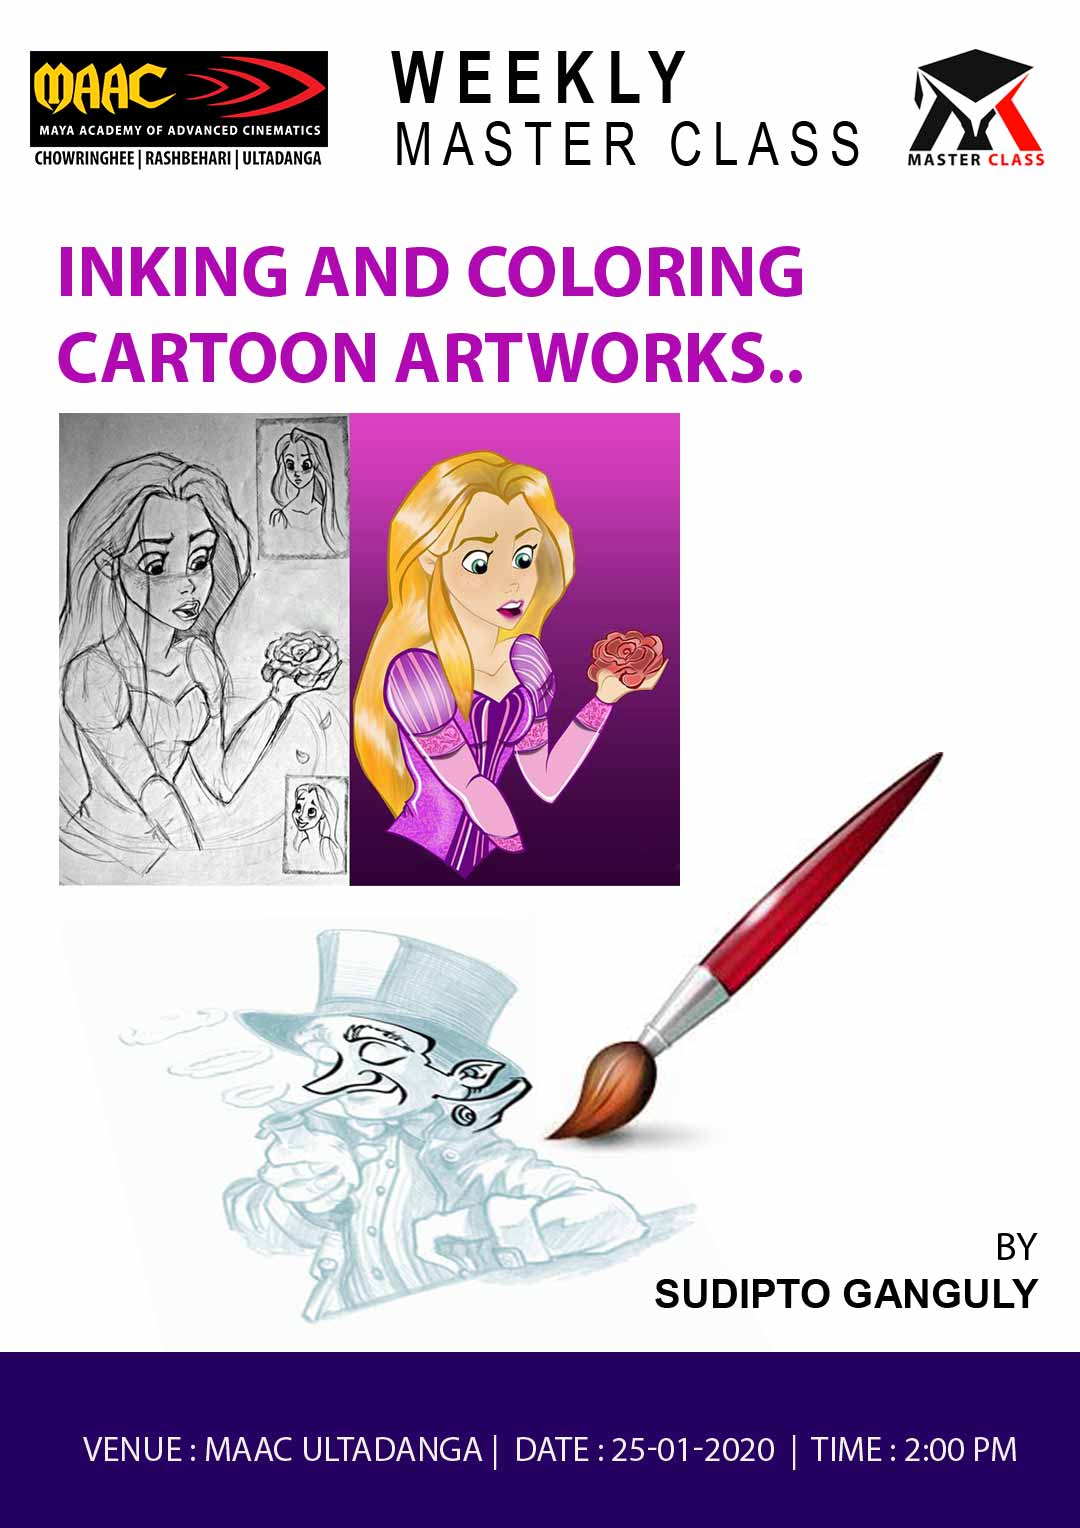 Weekly Master Class on Inking  & Coloring Cartoon Artworks